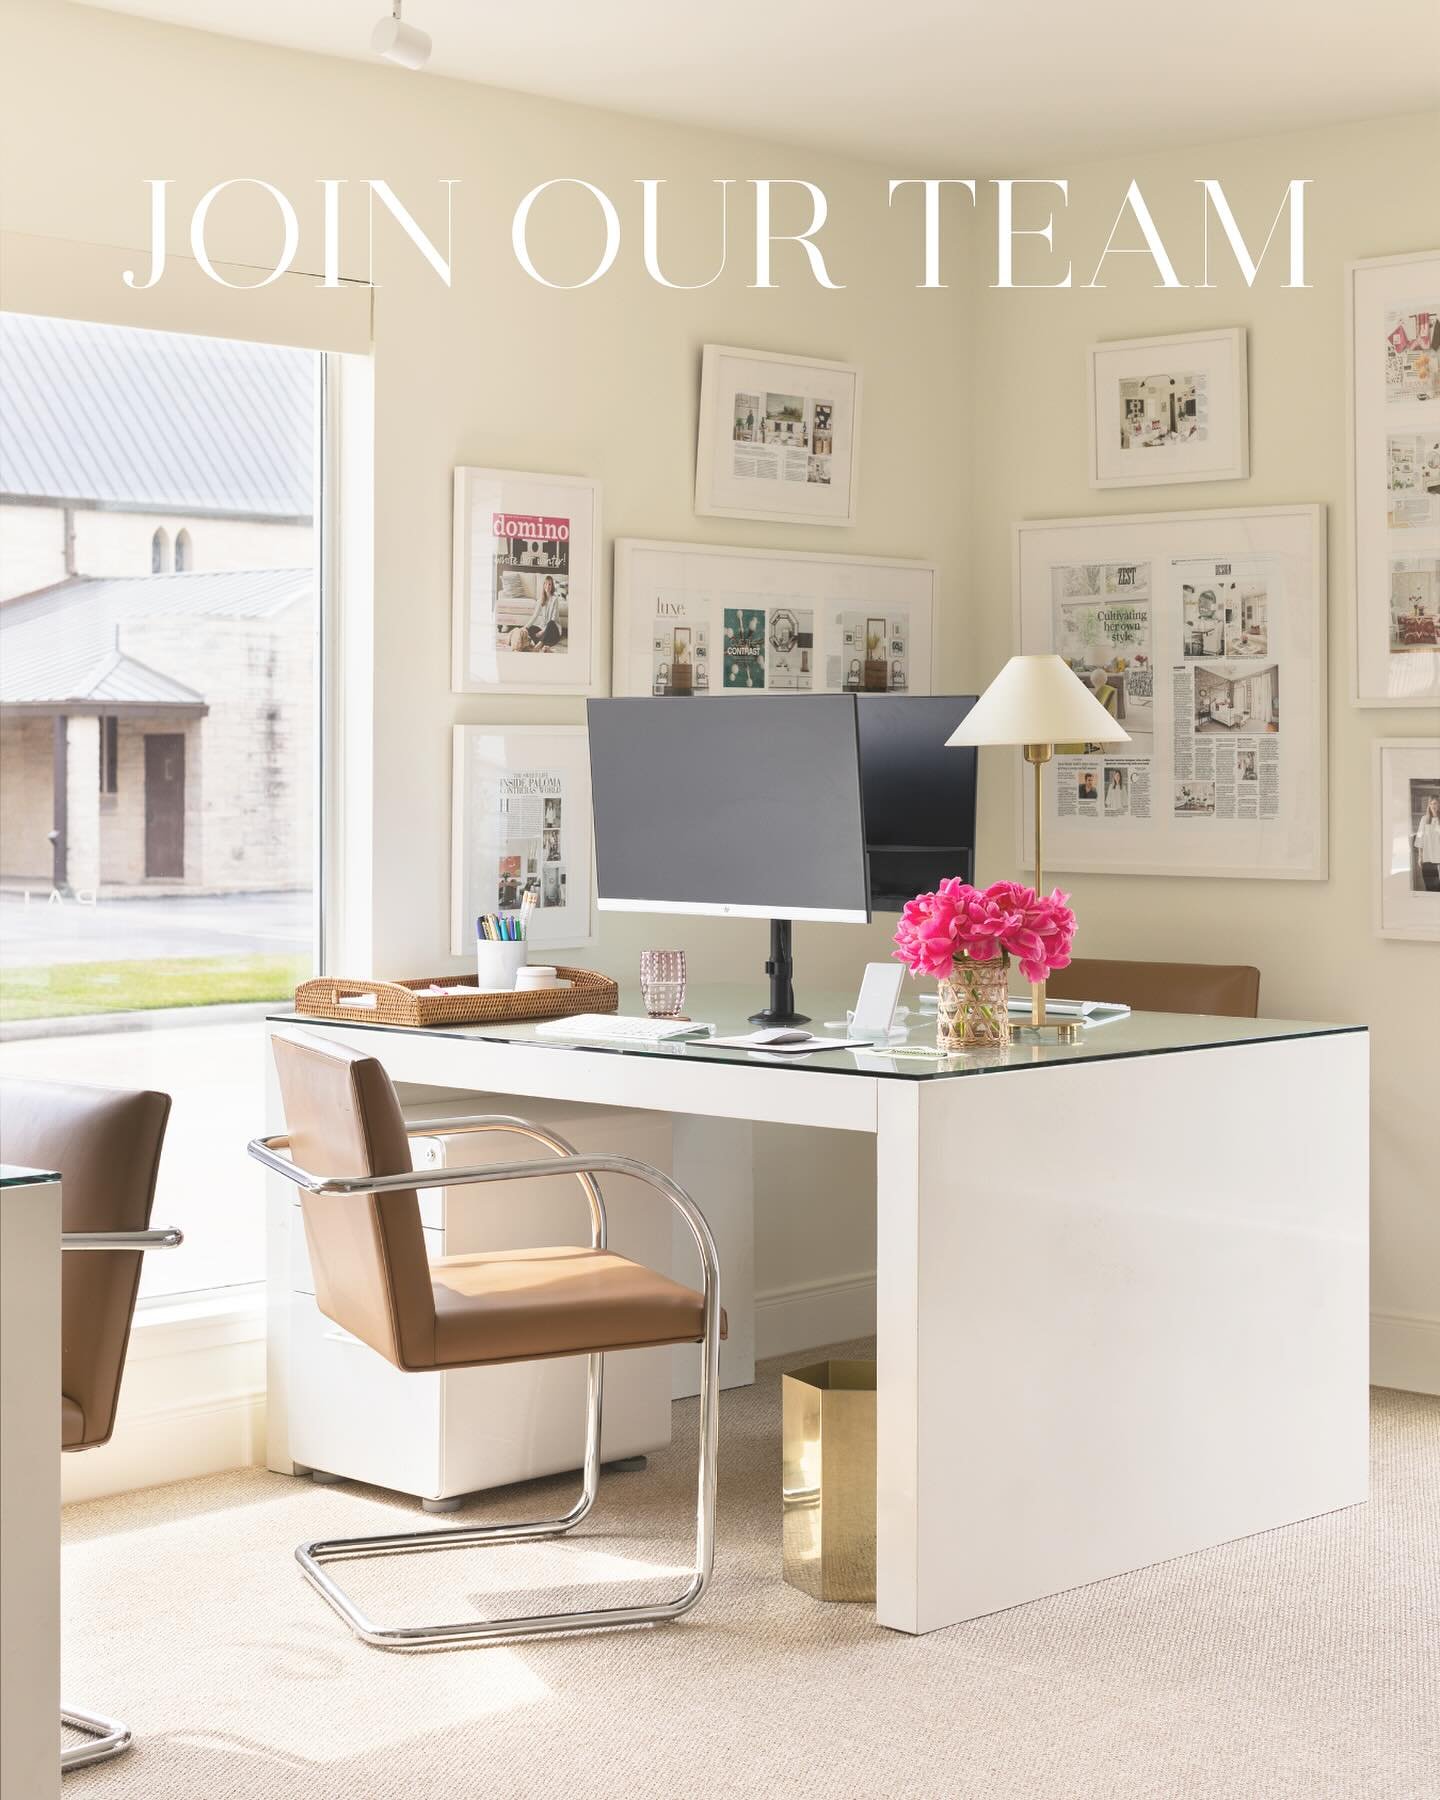 JOIN OUR TEAM: We are hiring a talented Project Manager/Interior Designer to join our dynamic team. This position is full-time and located at our Studio in Houston. The ideal candidate must have minimum 3 years experience in a residential interior de